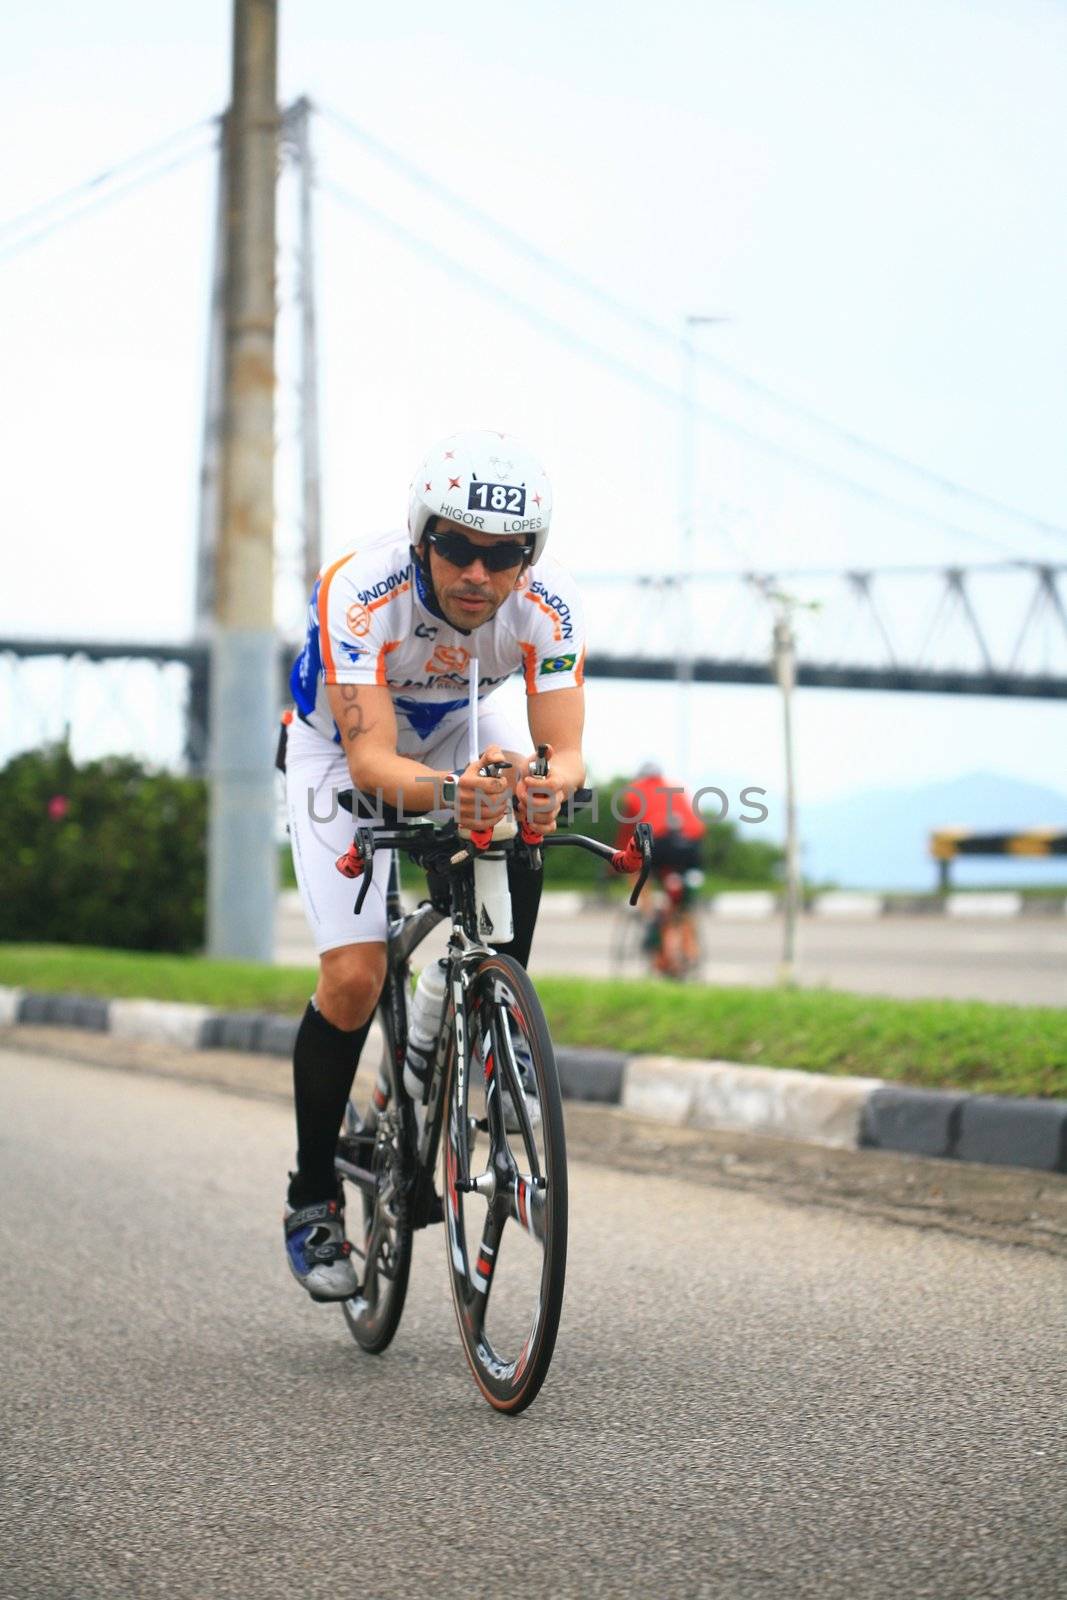 The triathlon IRONMAN competition held in Florianopolis - Santa Catarina - Brazil, on the 31th of may of 2009!